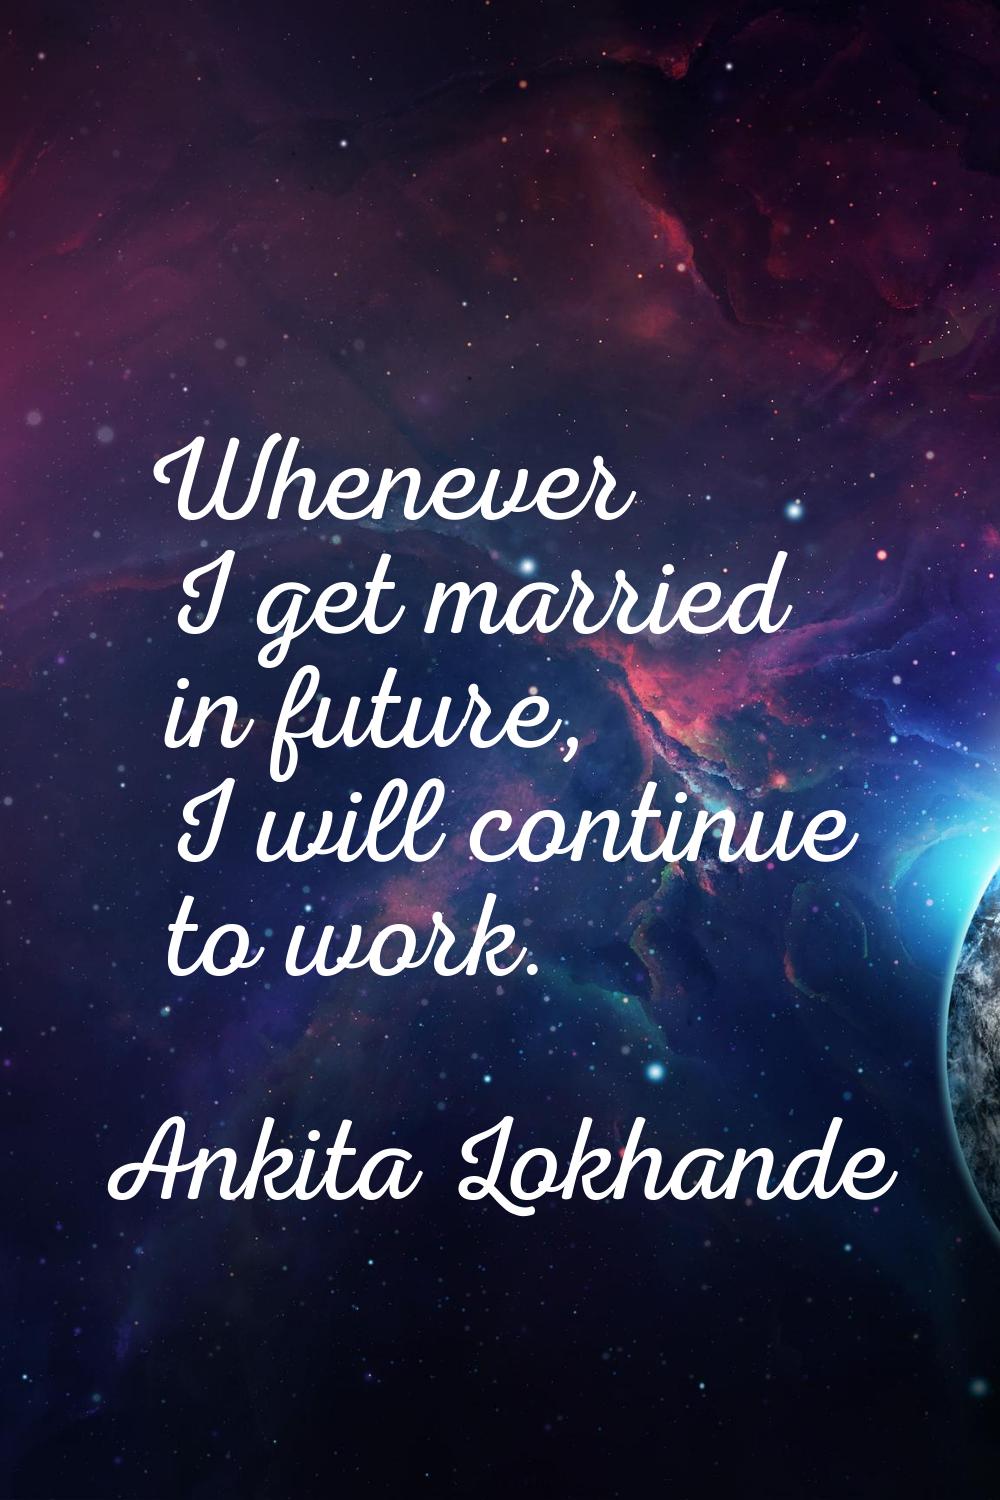 Whenever I get married in future, I will continue to work.